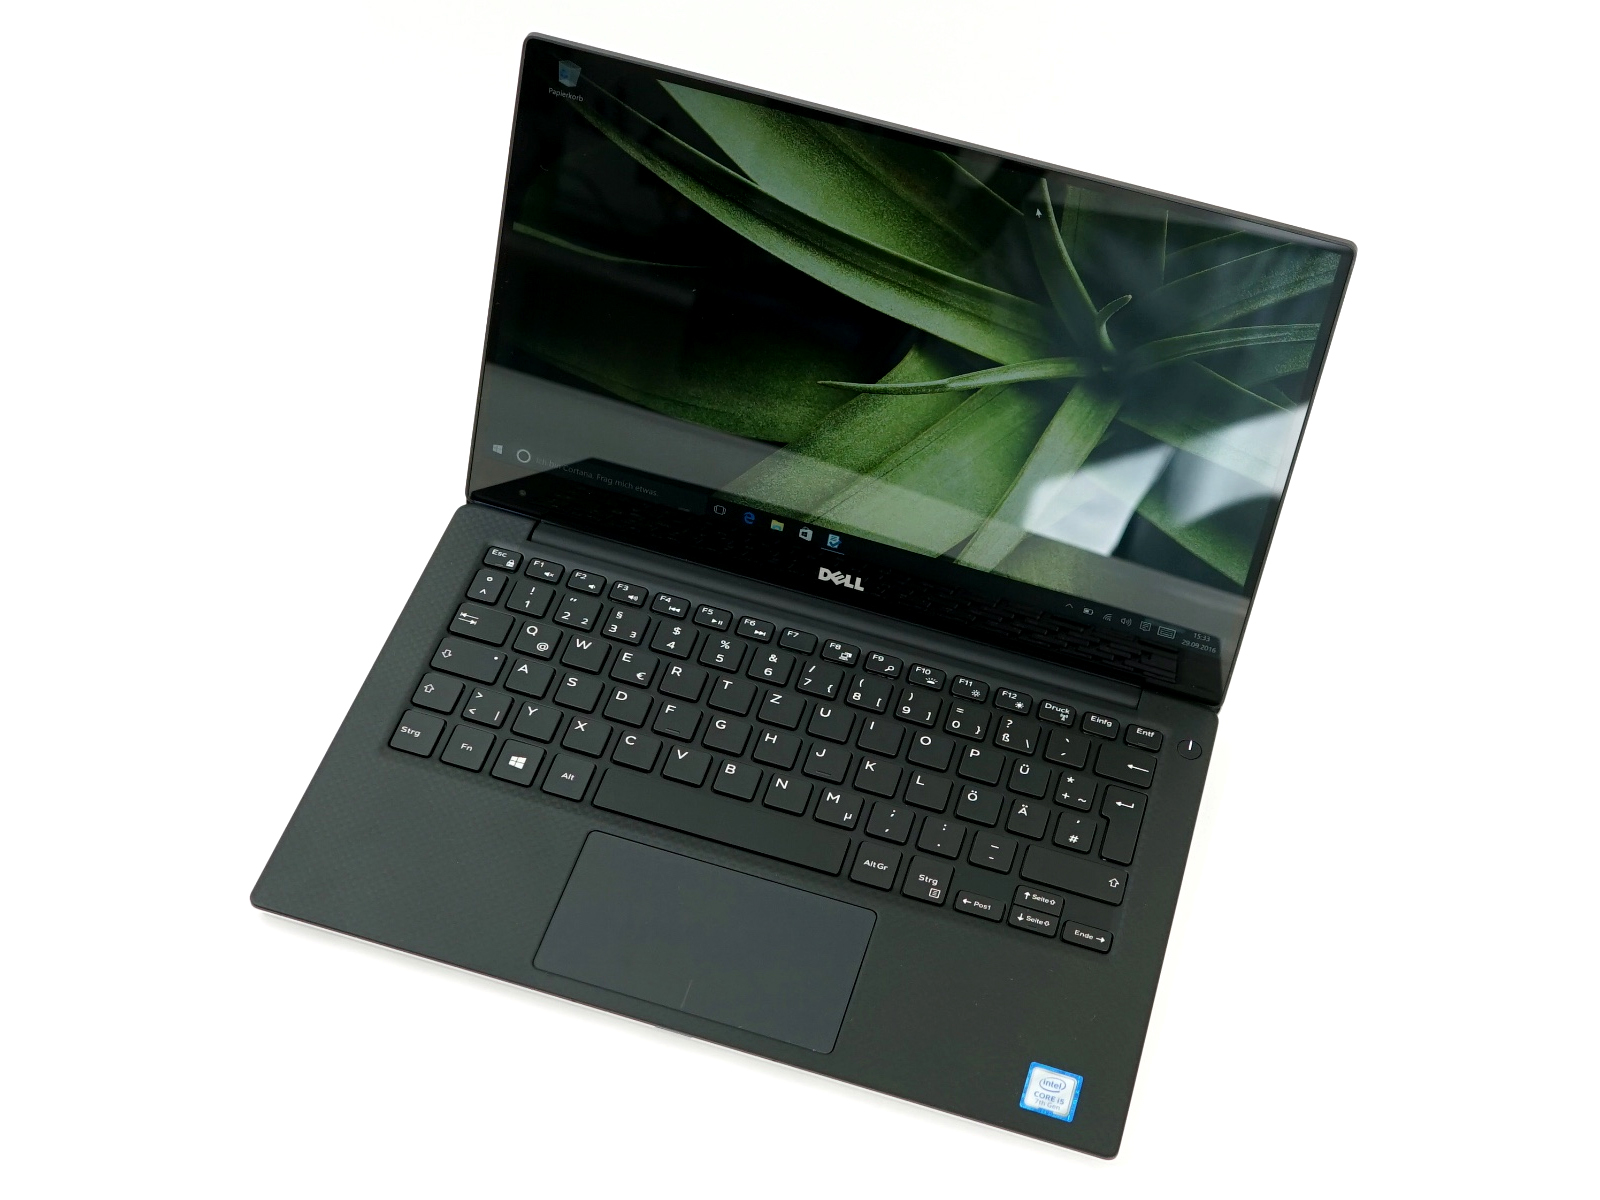 Dell XPS 13 9360 (FHD, i7, Iris) Laptop Review - NotebookCheck.net ...